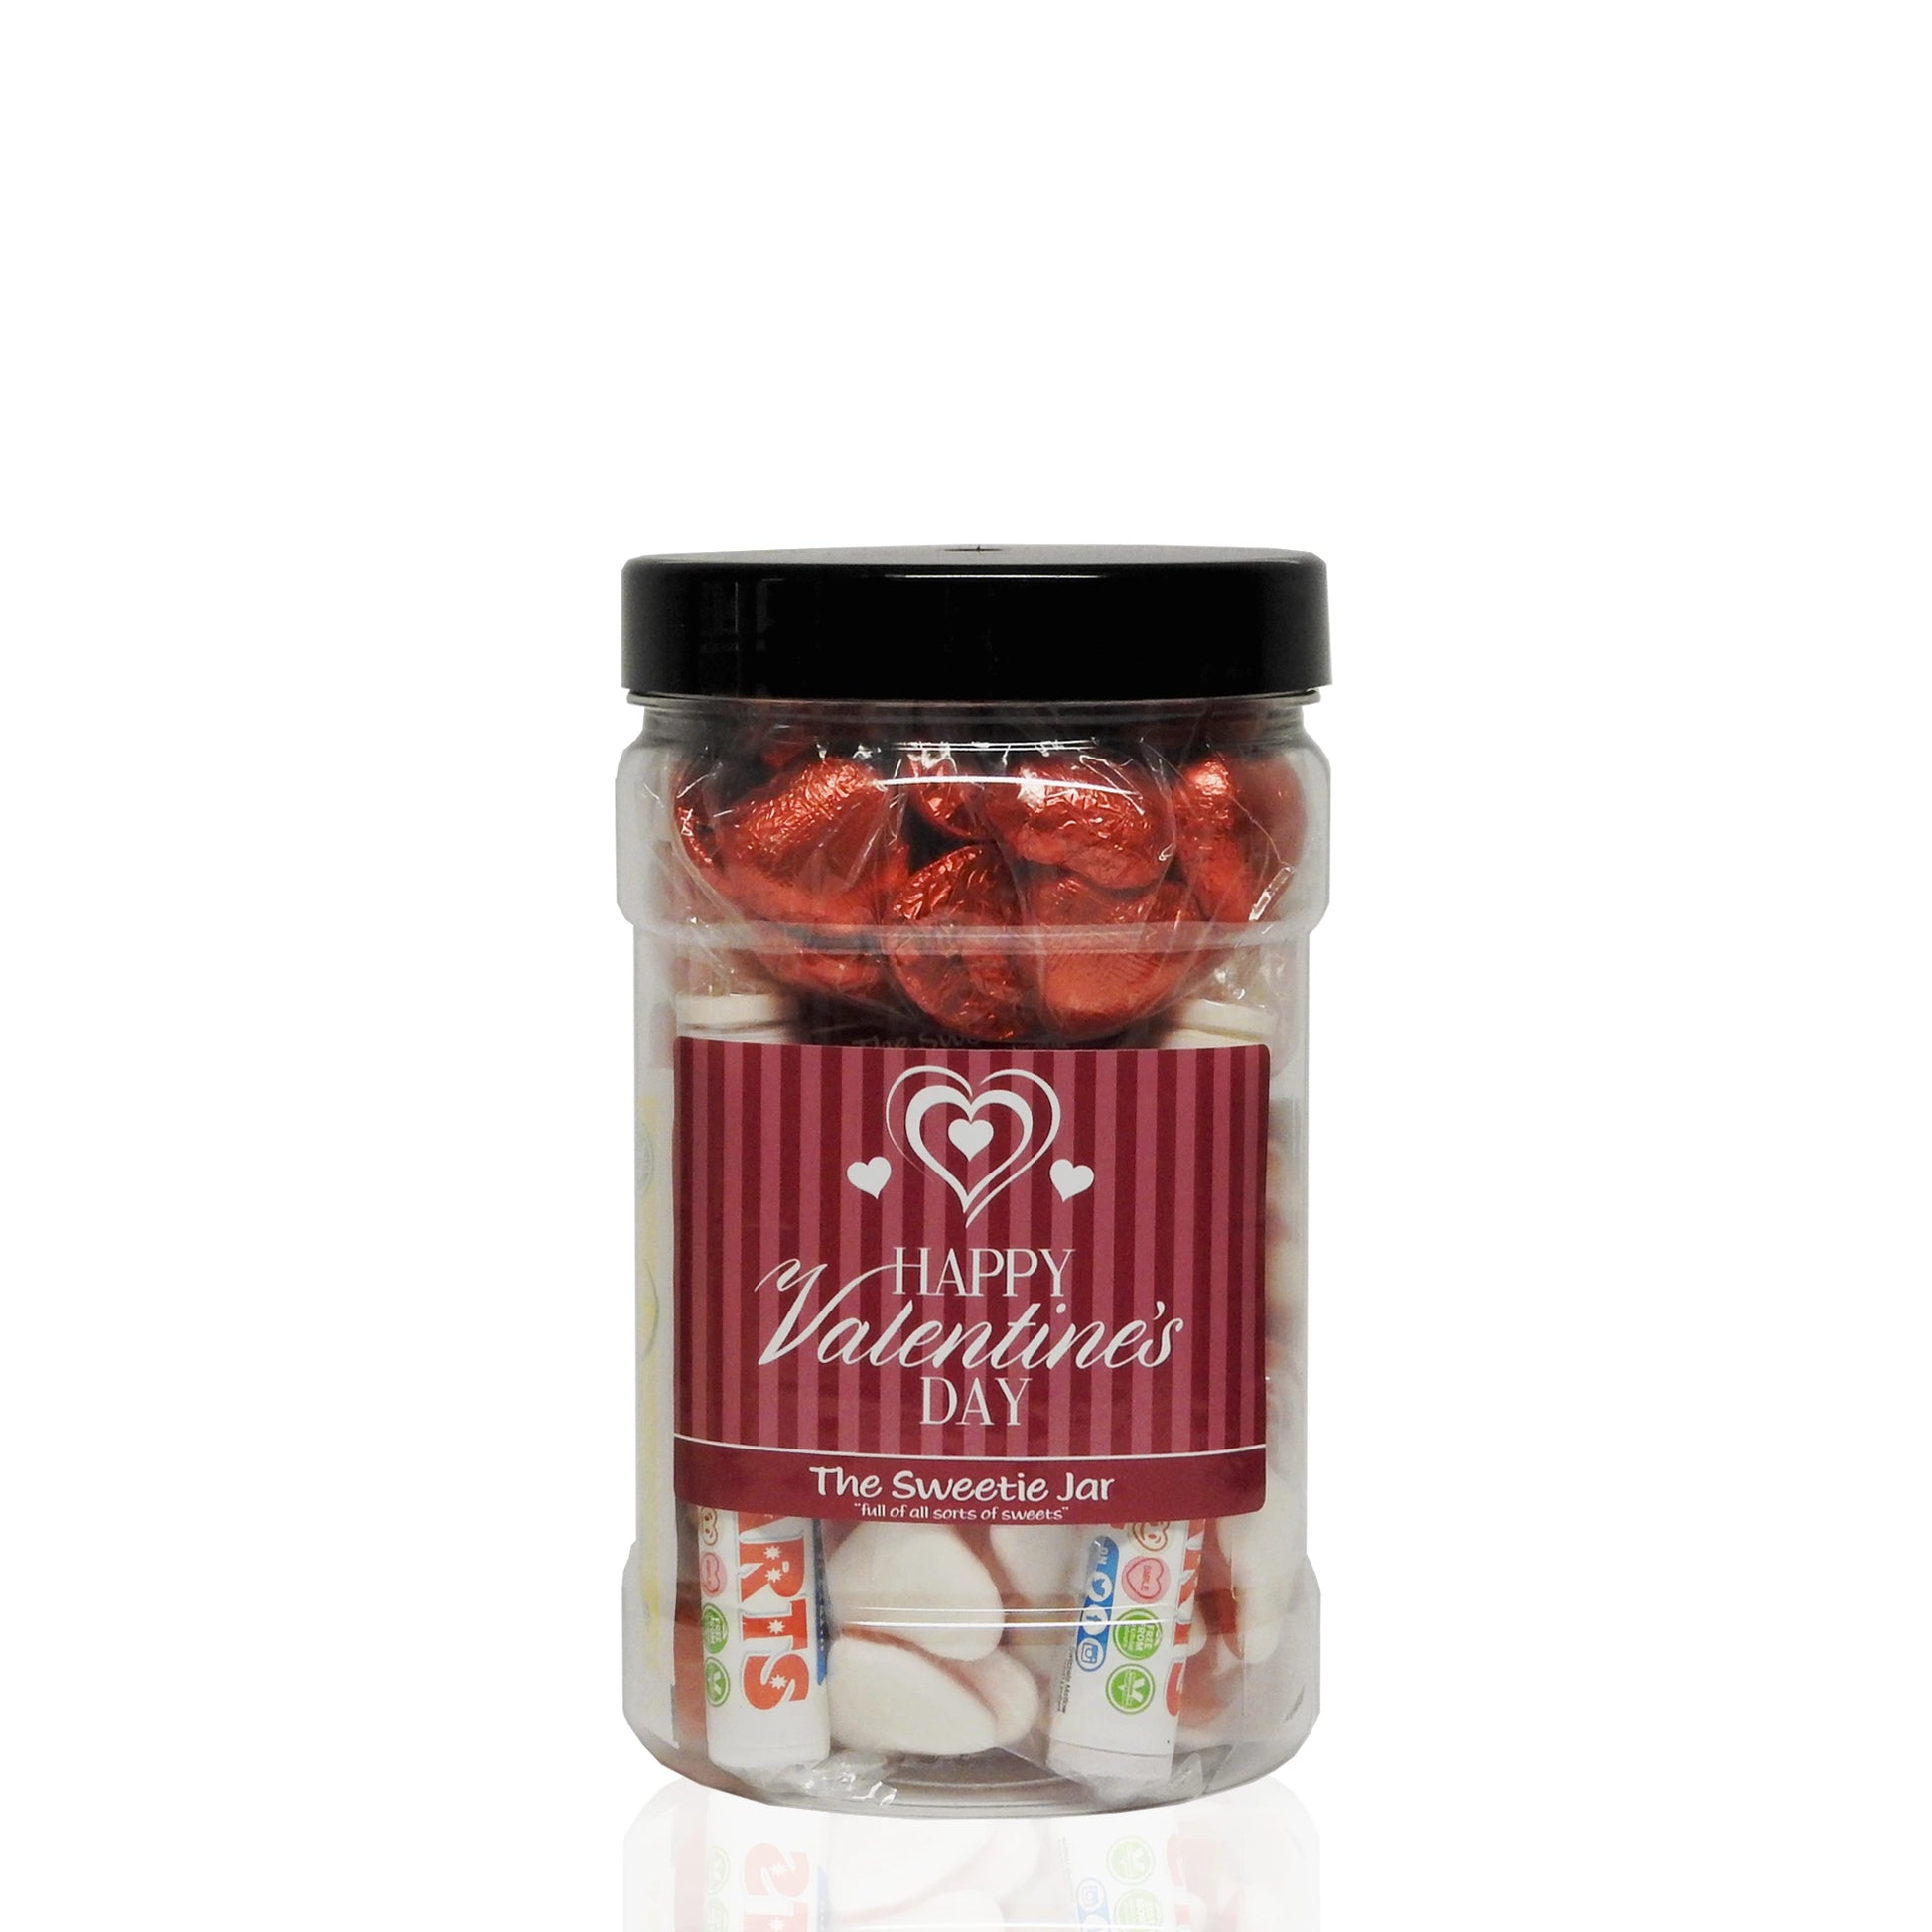 Happy Valentines Day Small Gift Jar - Retro Sweet Jars at The Sweetie Jar